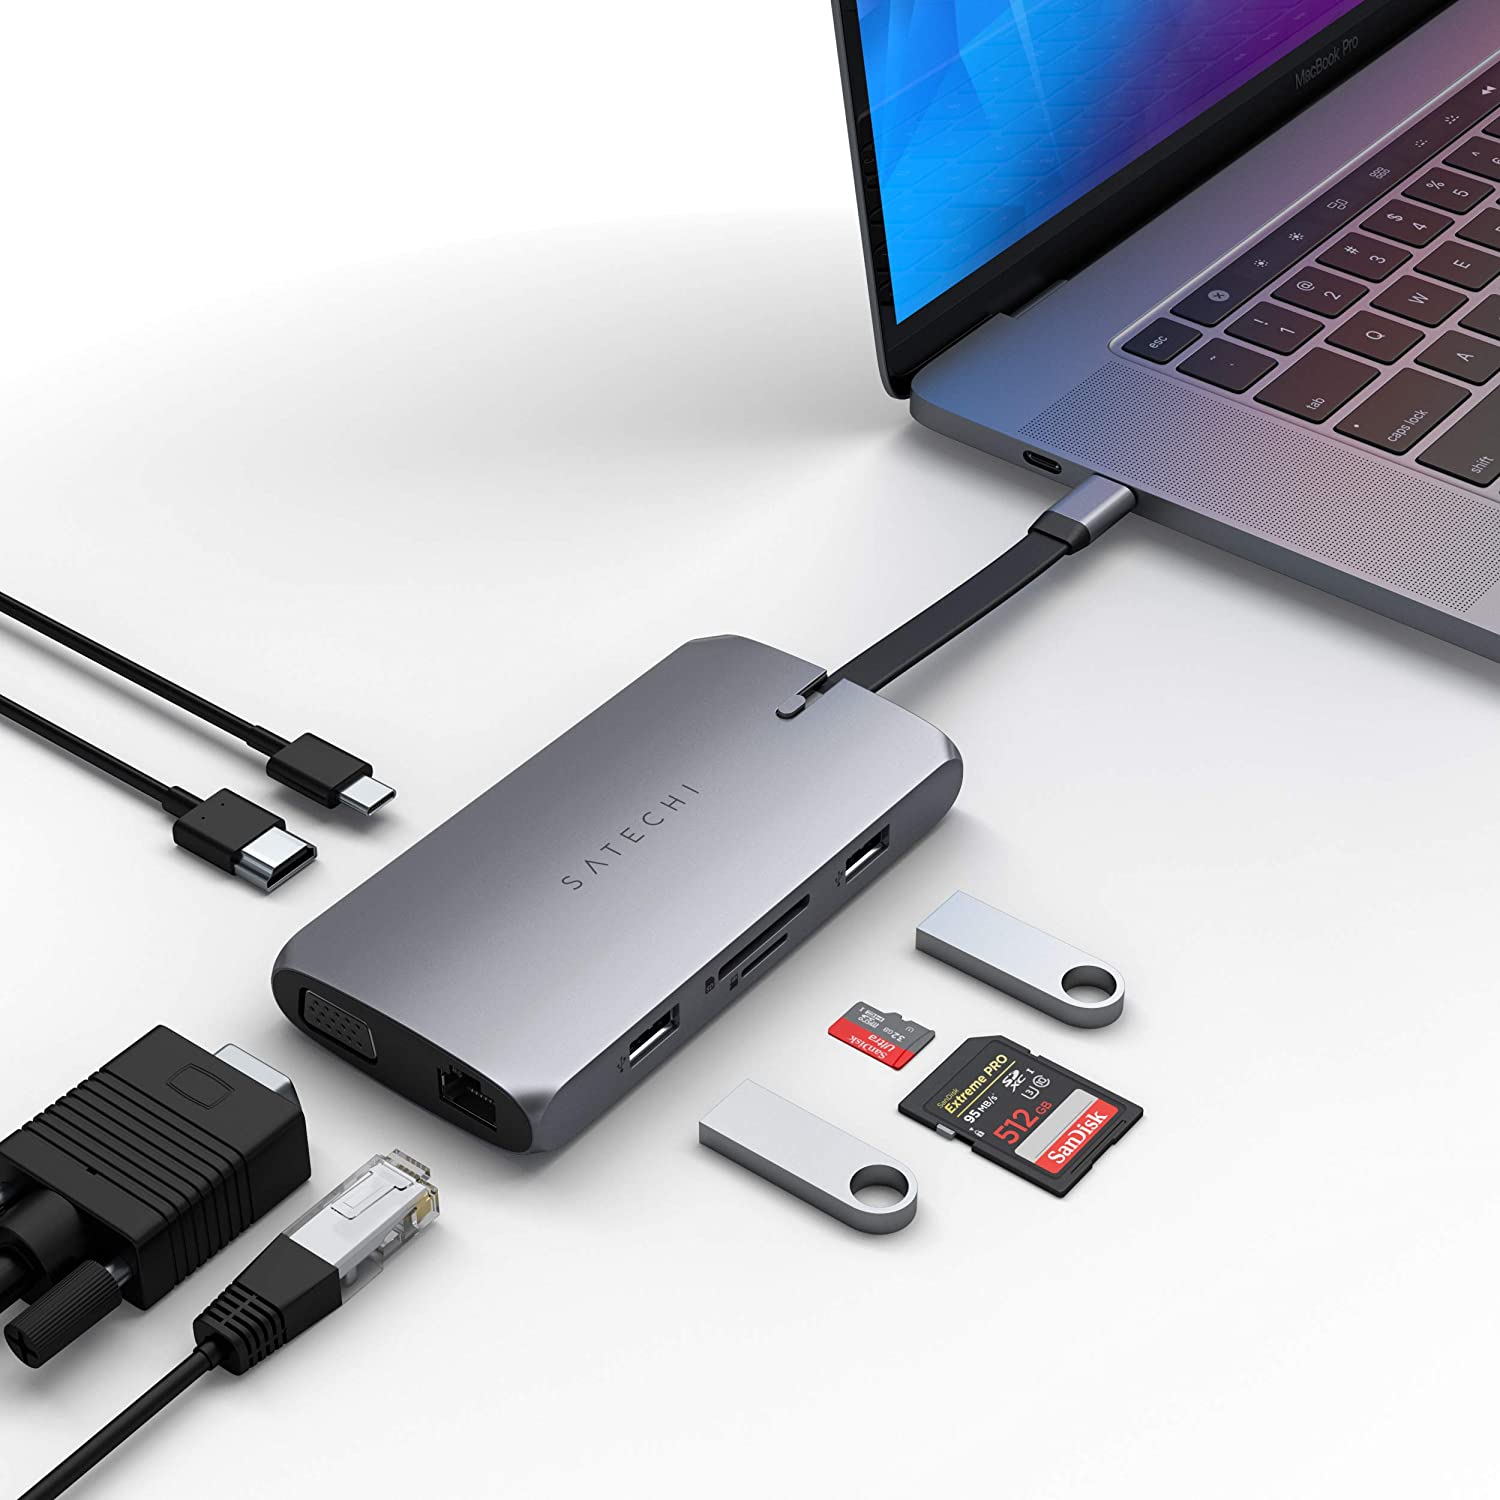 Troubleshooting Guide: Fixing Issues When Your Dongle Is Not Working